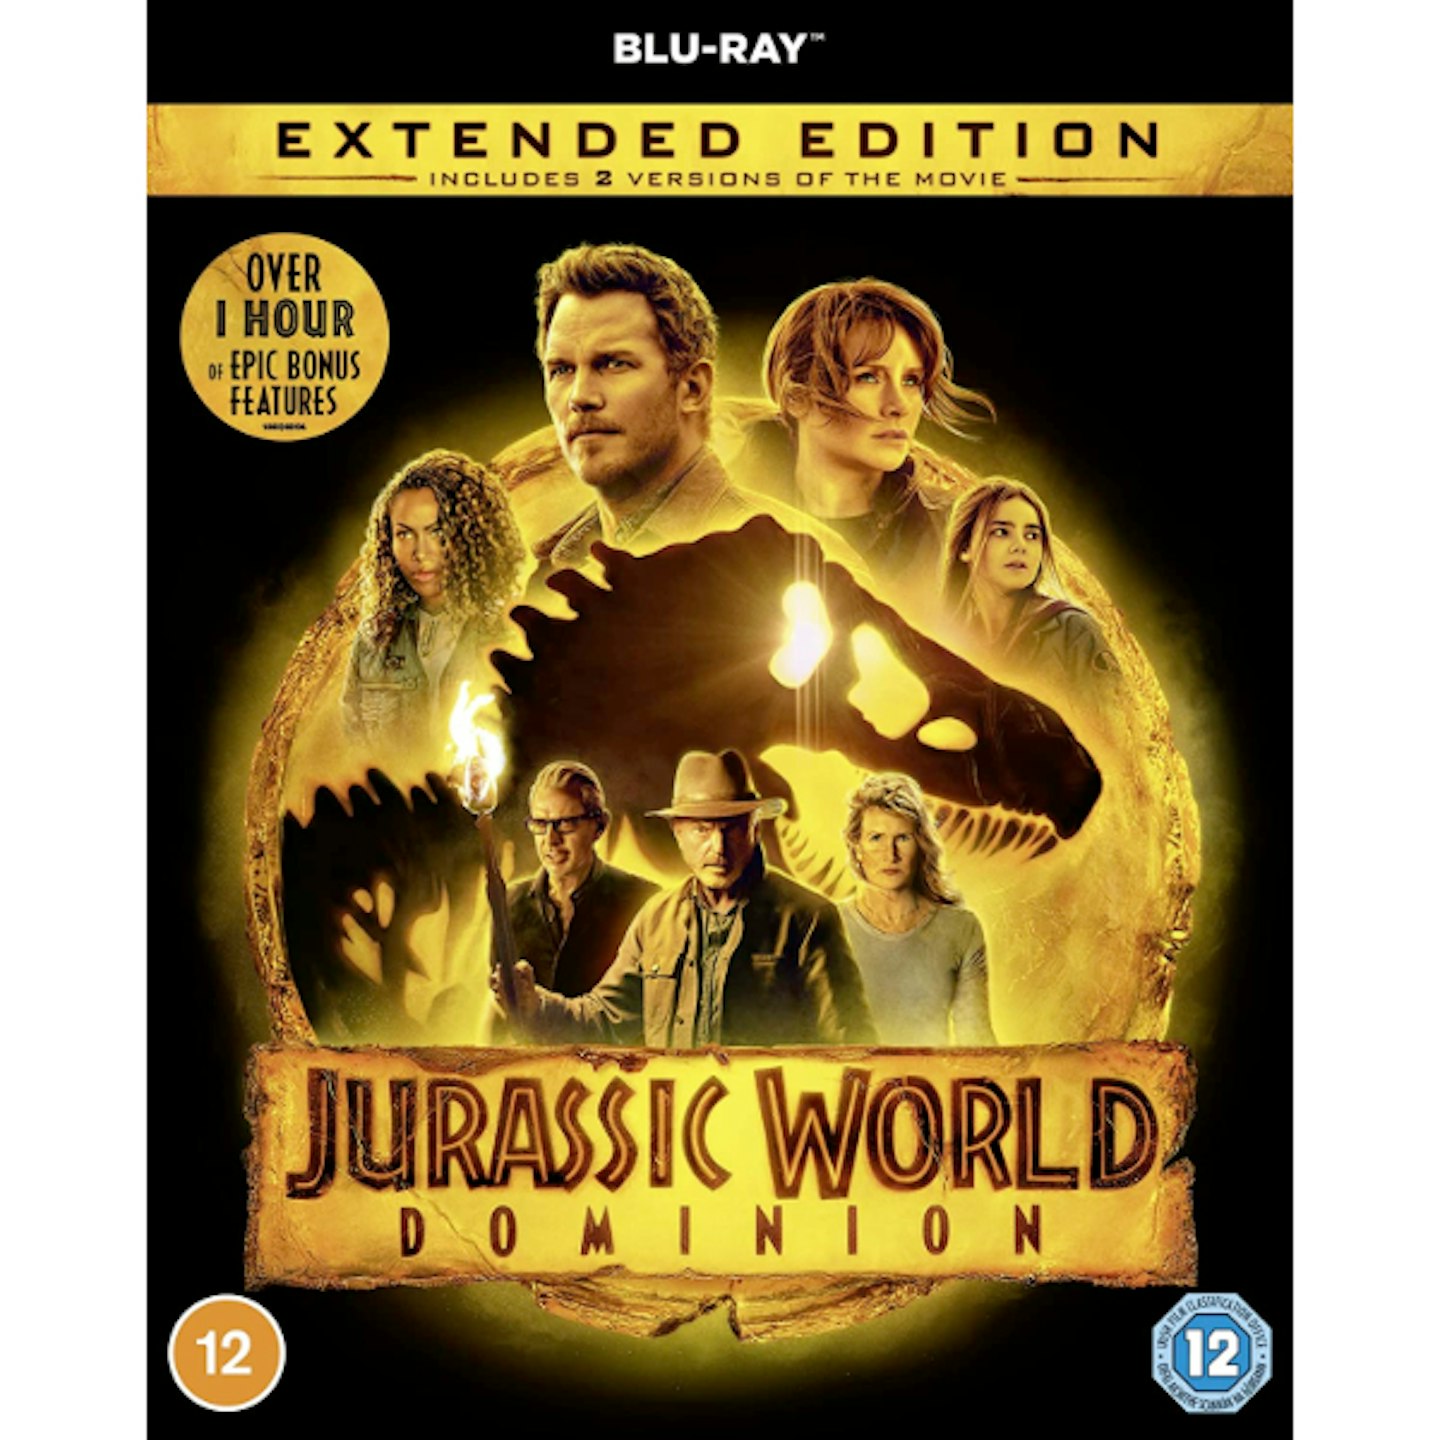 Jurassic World Dominion - Extended Edition